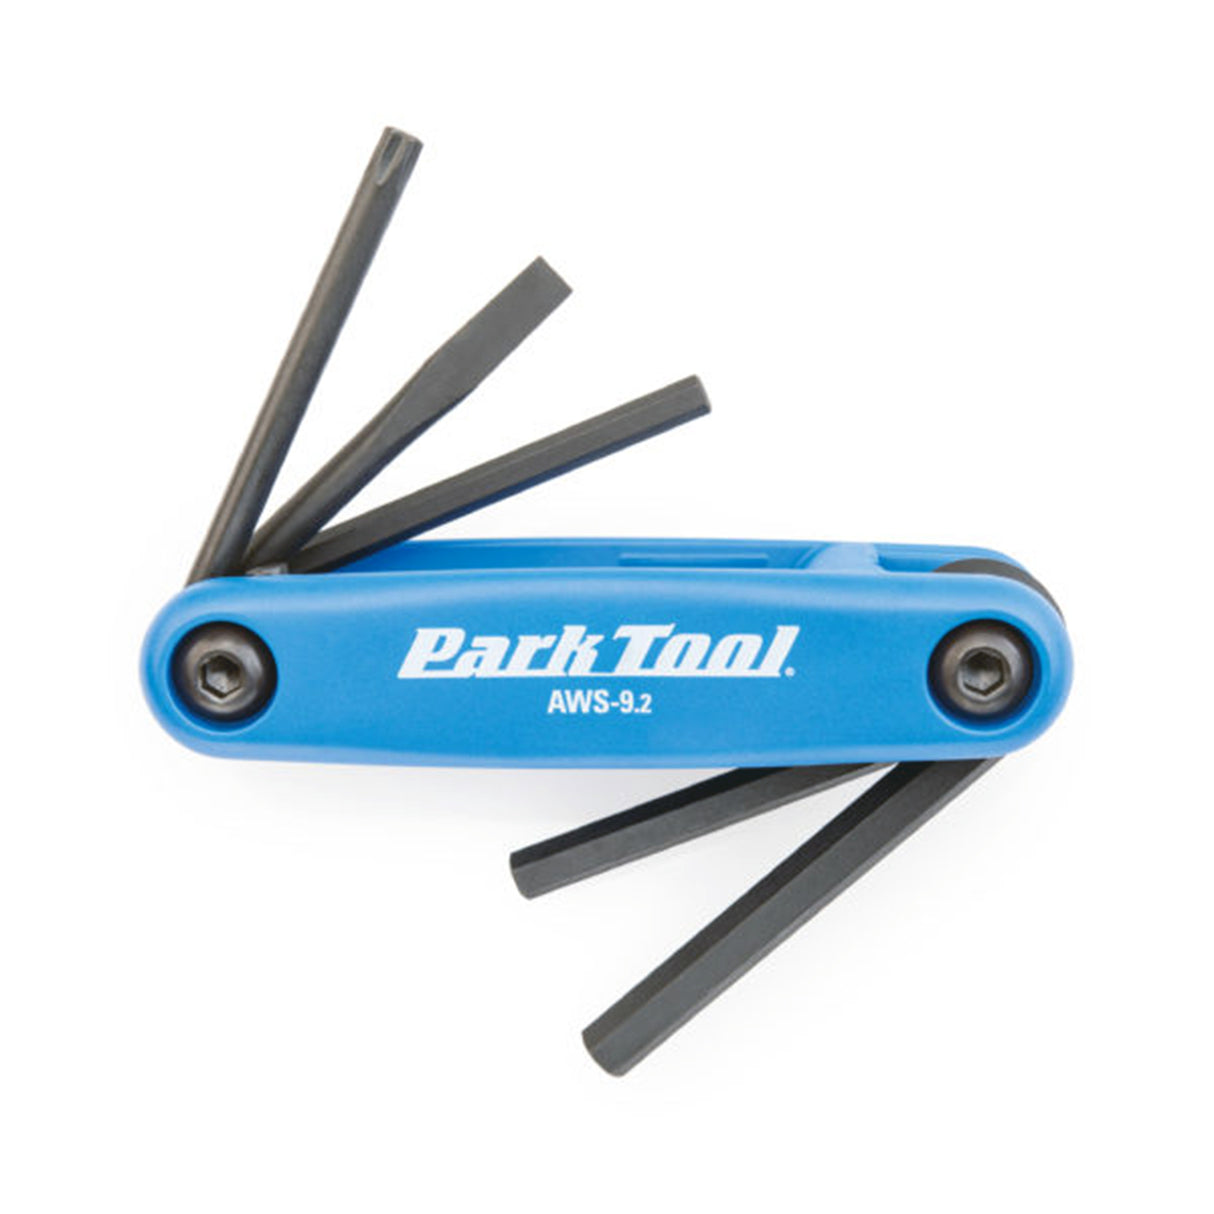 Park Tool Fold-Up Hex Wrench AWS-9.2